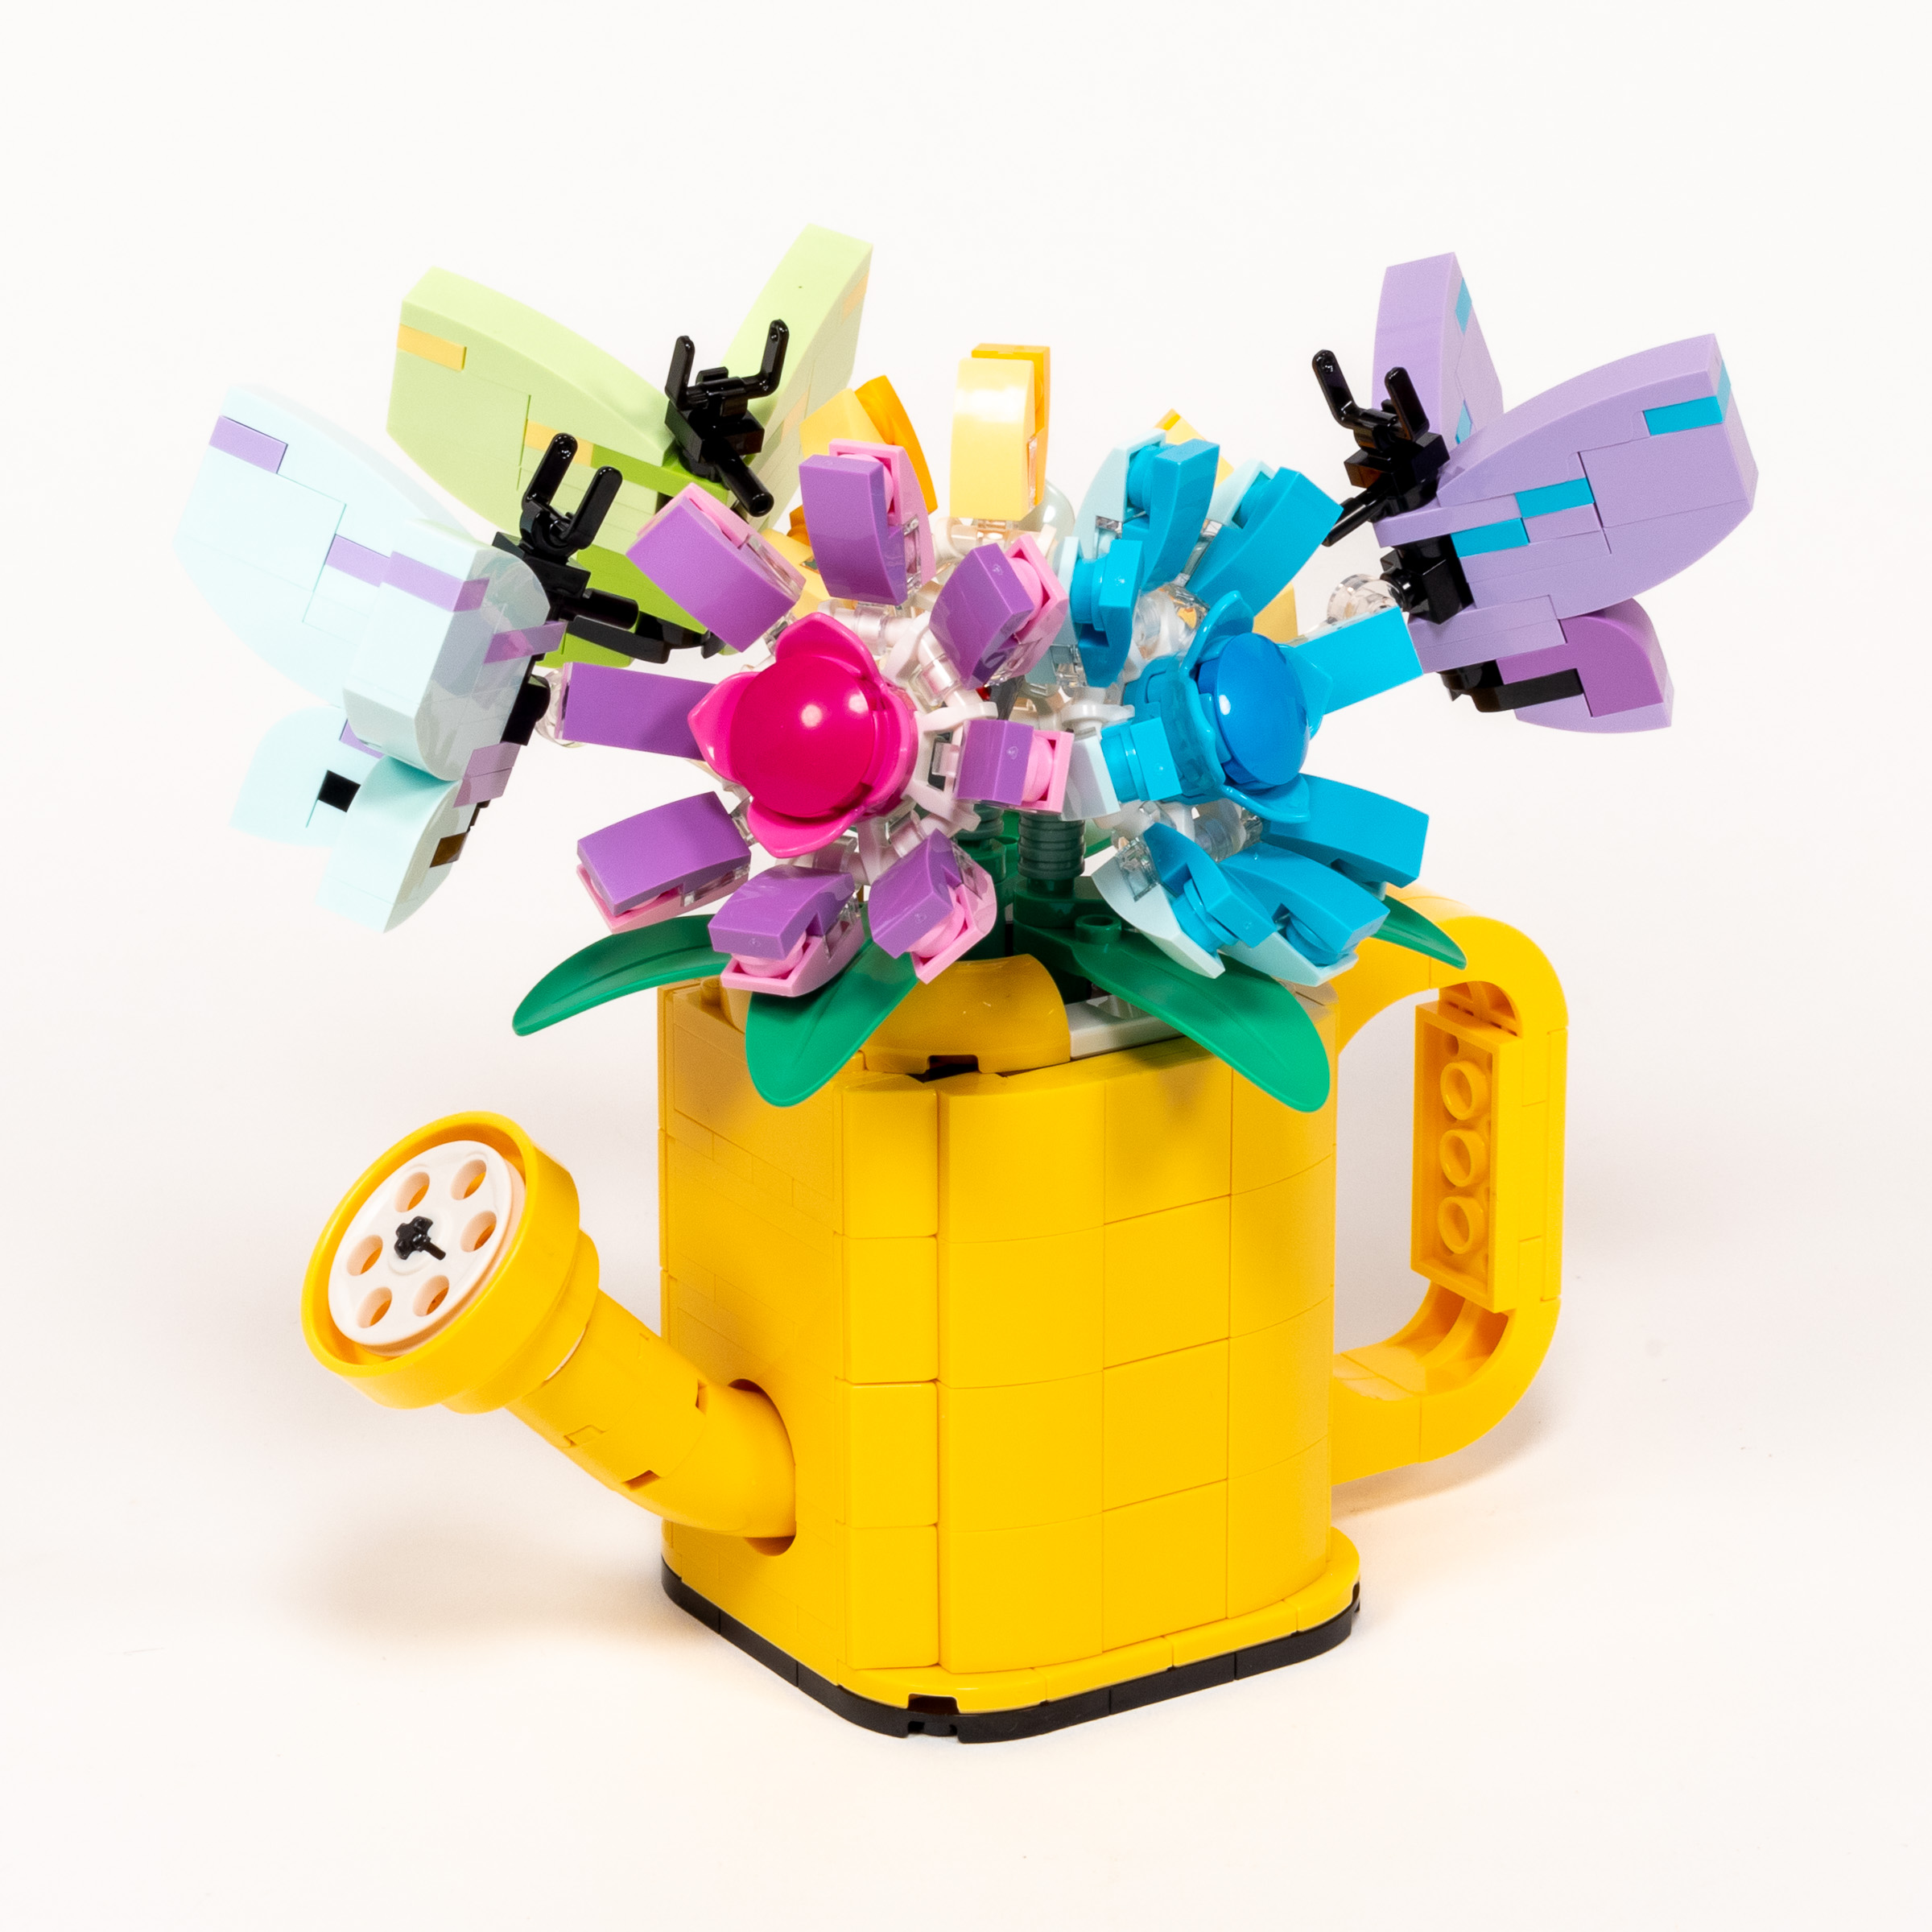 Lego Flower Watering can